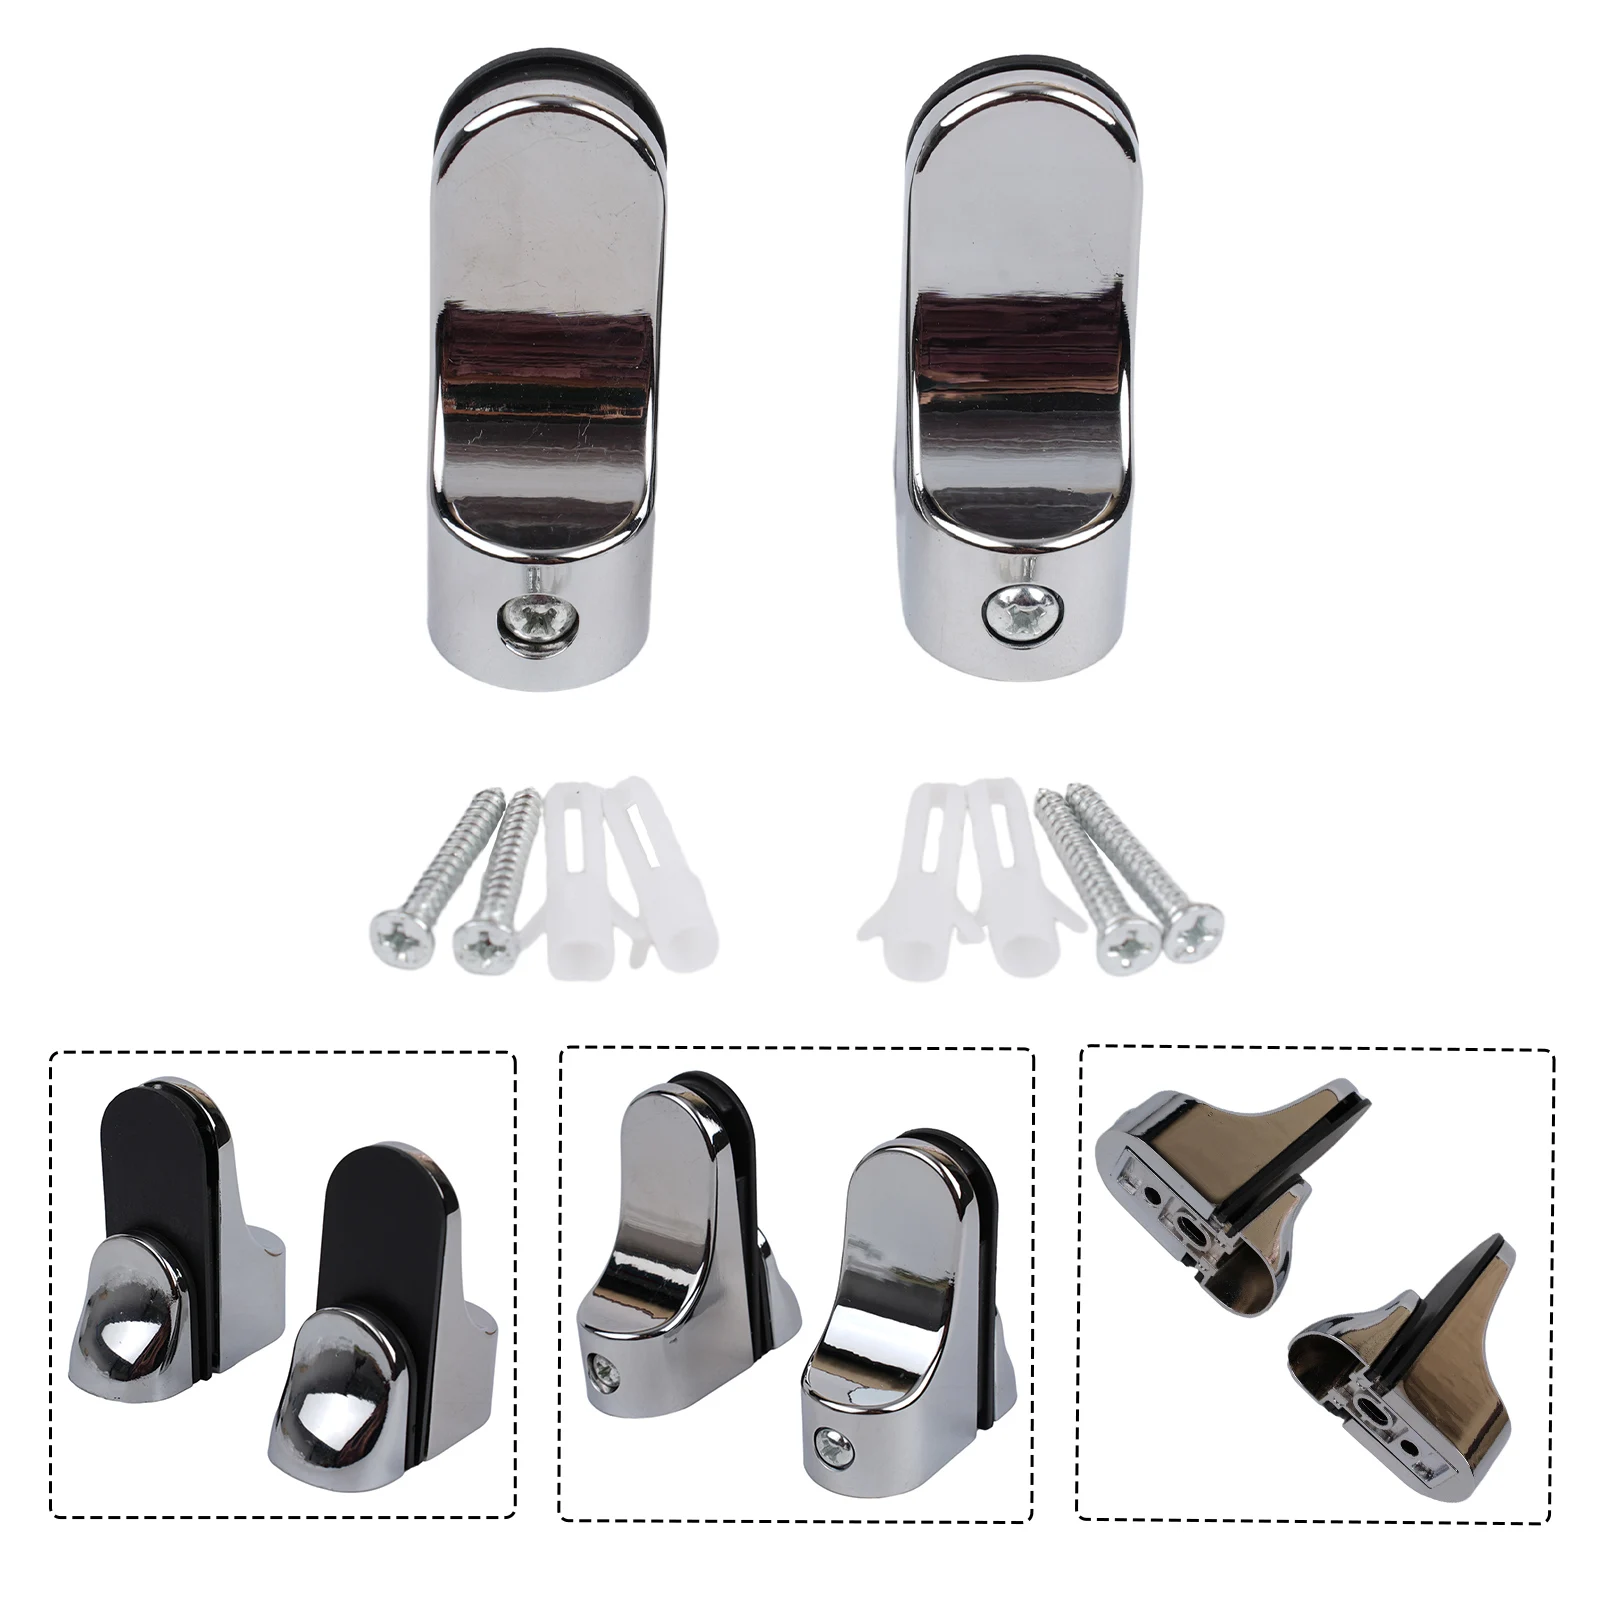 2pcs Adjustable Glass Shelf Holder Clamps 55 X 24 Mm Bathroom Support Clamp Holder Zinc Alloy Glass Clamp Fixed Clip